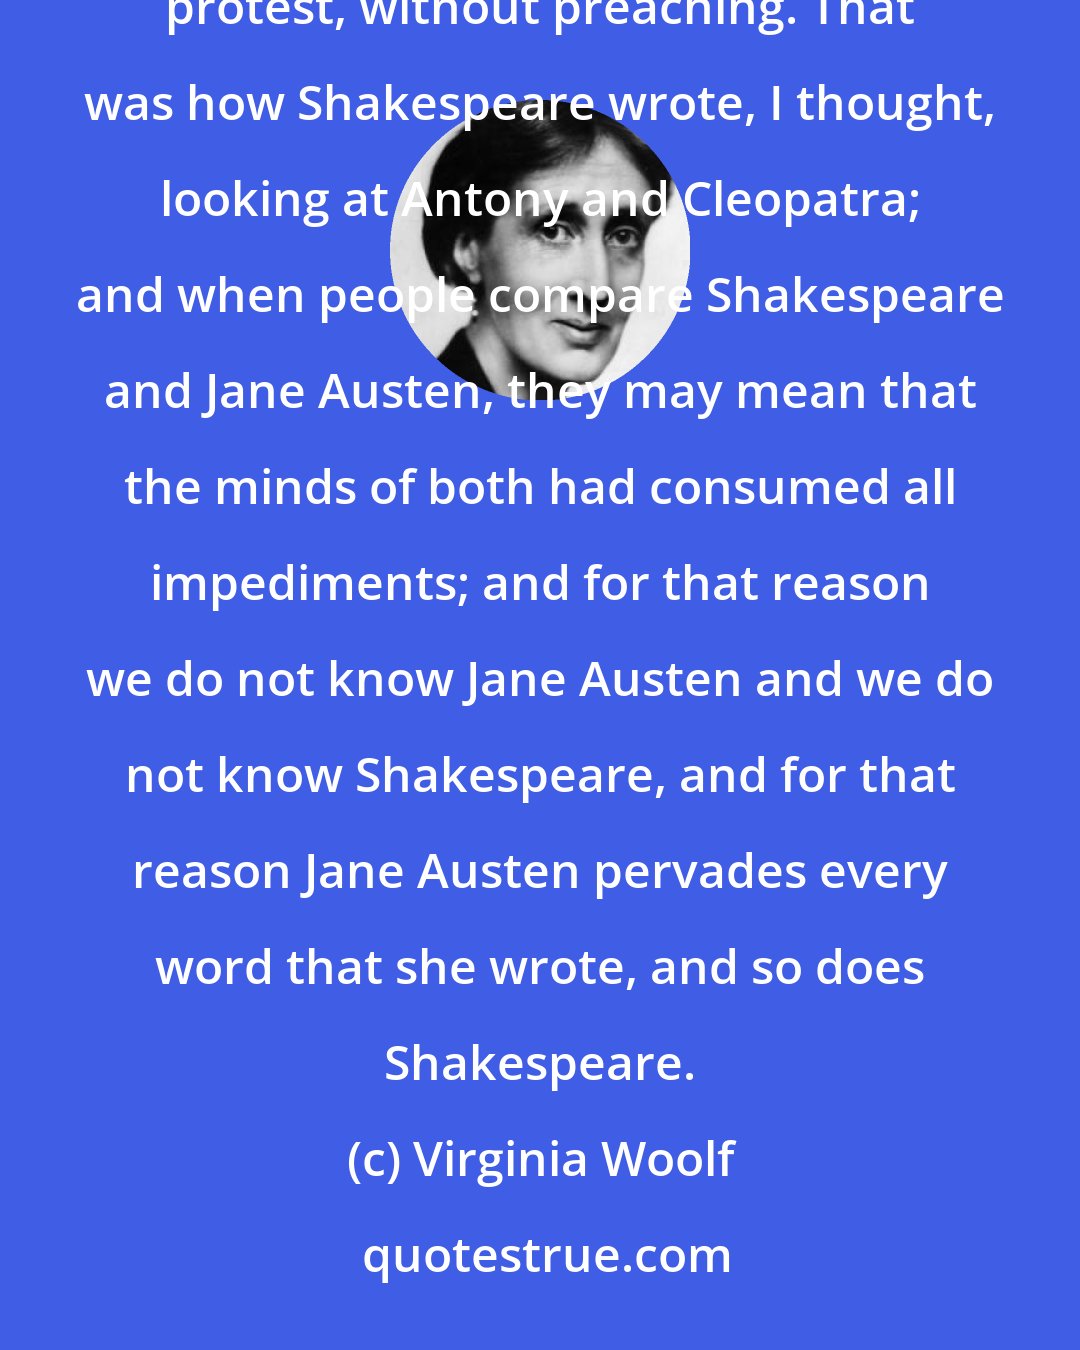 Virginia Woolf: Here was a woman about the year 1800 writing without hate, without bitterness, without fear, without protest, without preaching. That was how Shakespeare wrote, I thought, looking at Antony and Cleopatra; and when people compare Shakespeare and Jane Austen, they may mean that the minds of both had consumed all impediments; and for that reason we do not know Jane Austen and we do not know Shakespeare, and for that reason Jane Austen pervades every word that she wrote, and so does Shakespeare.